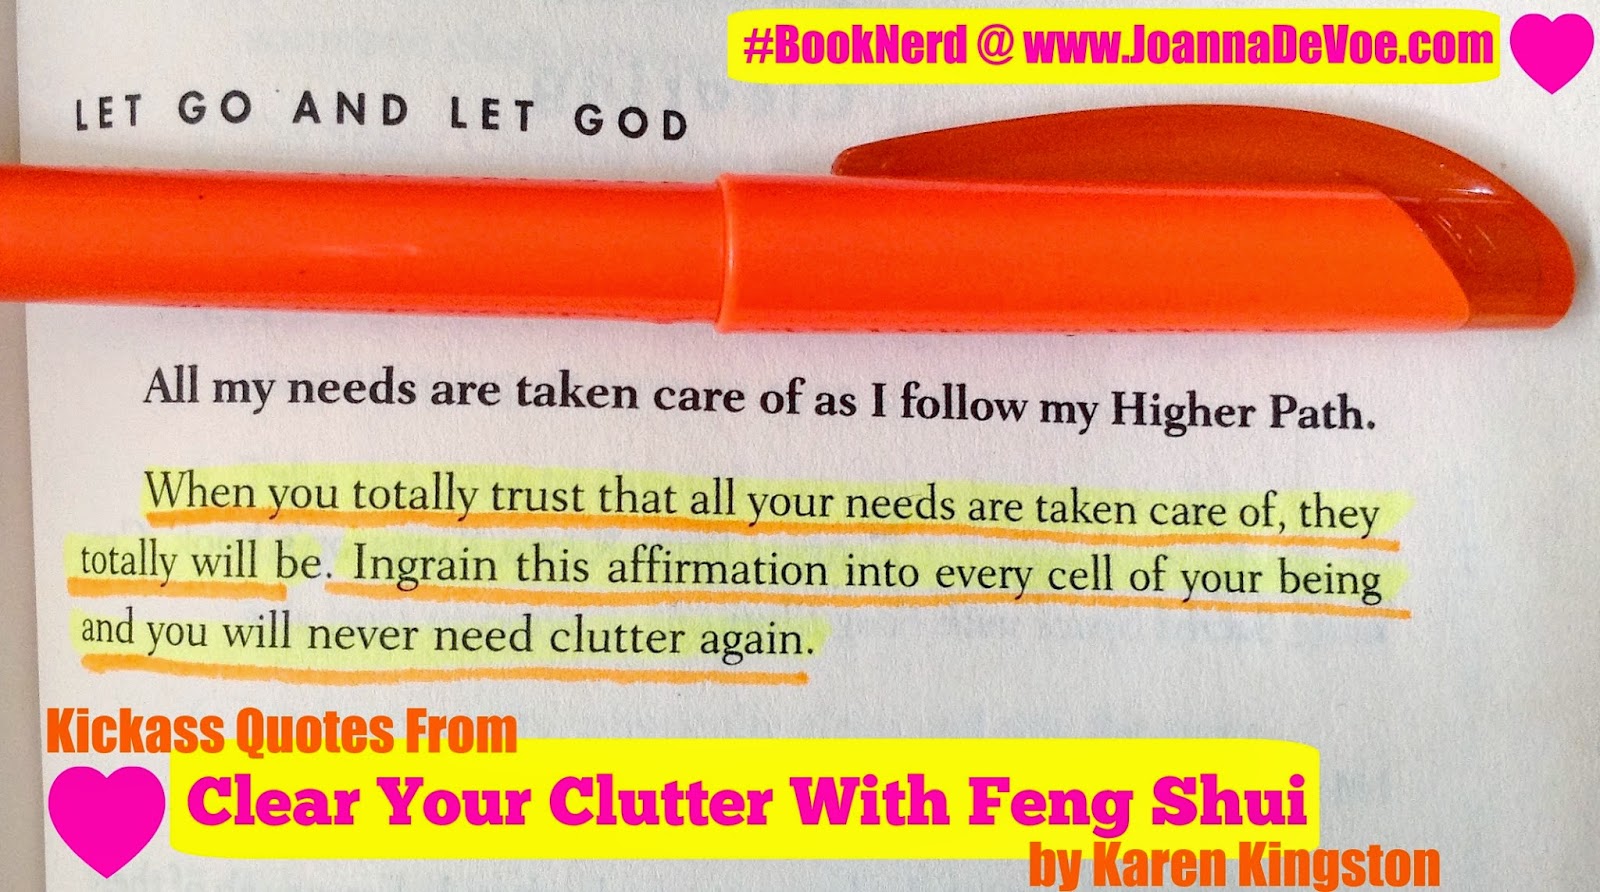 clear your clutter with feng shui pdf